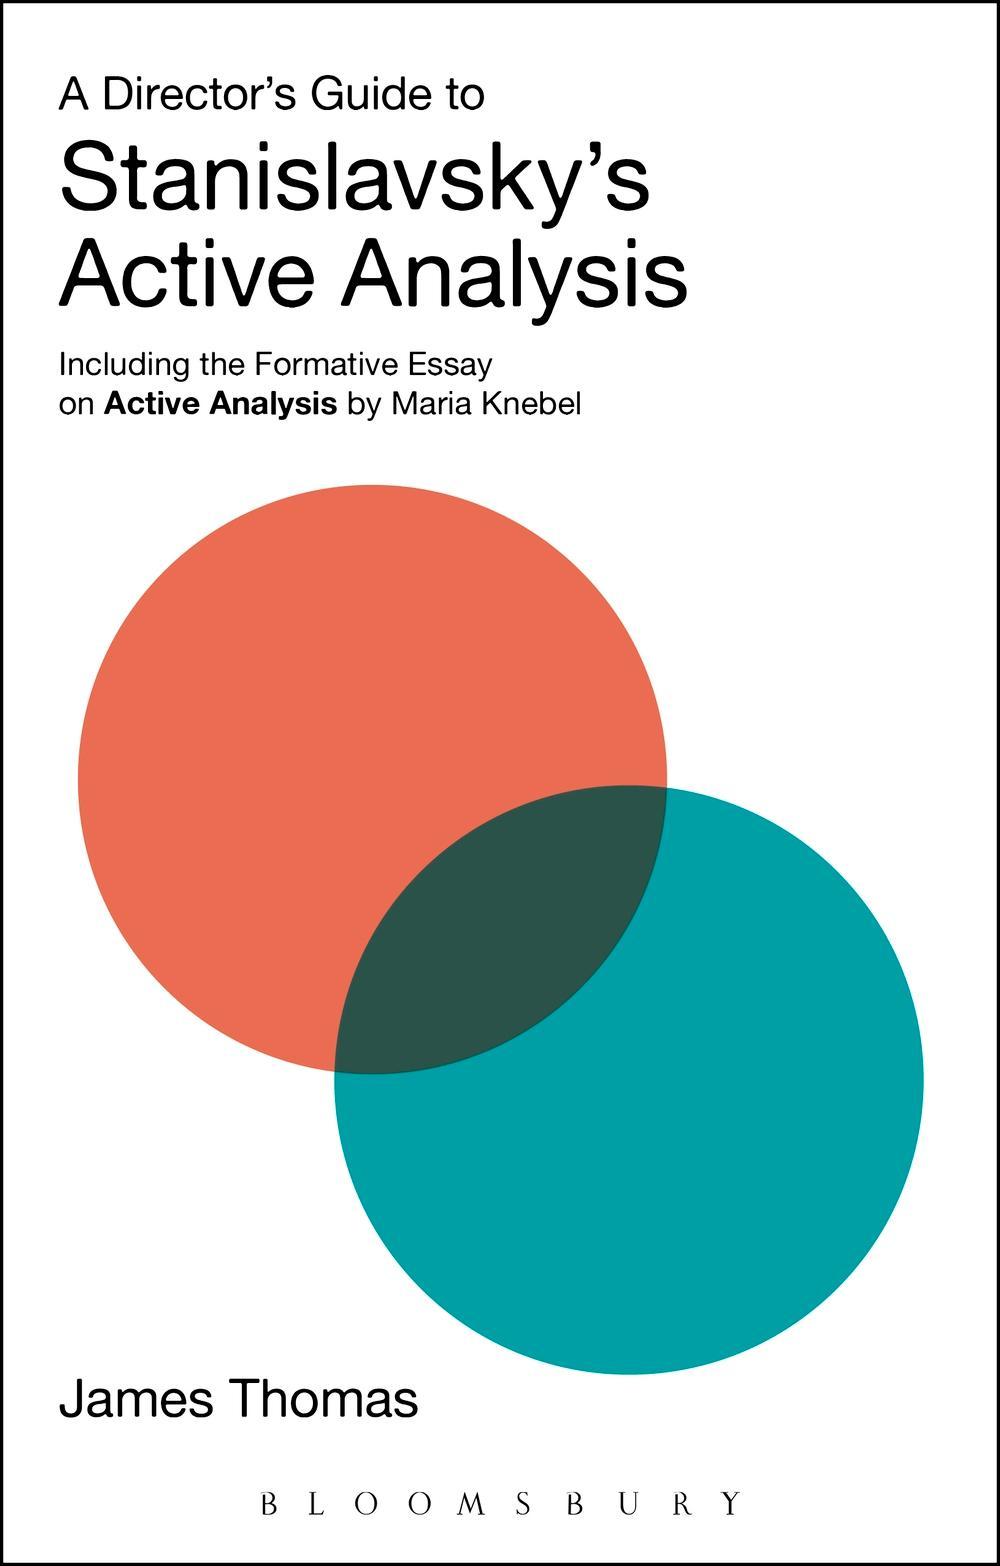 Director's Guide to Stanislavsky's Active Analysis